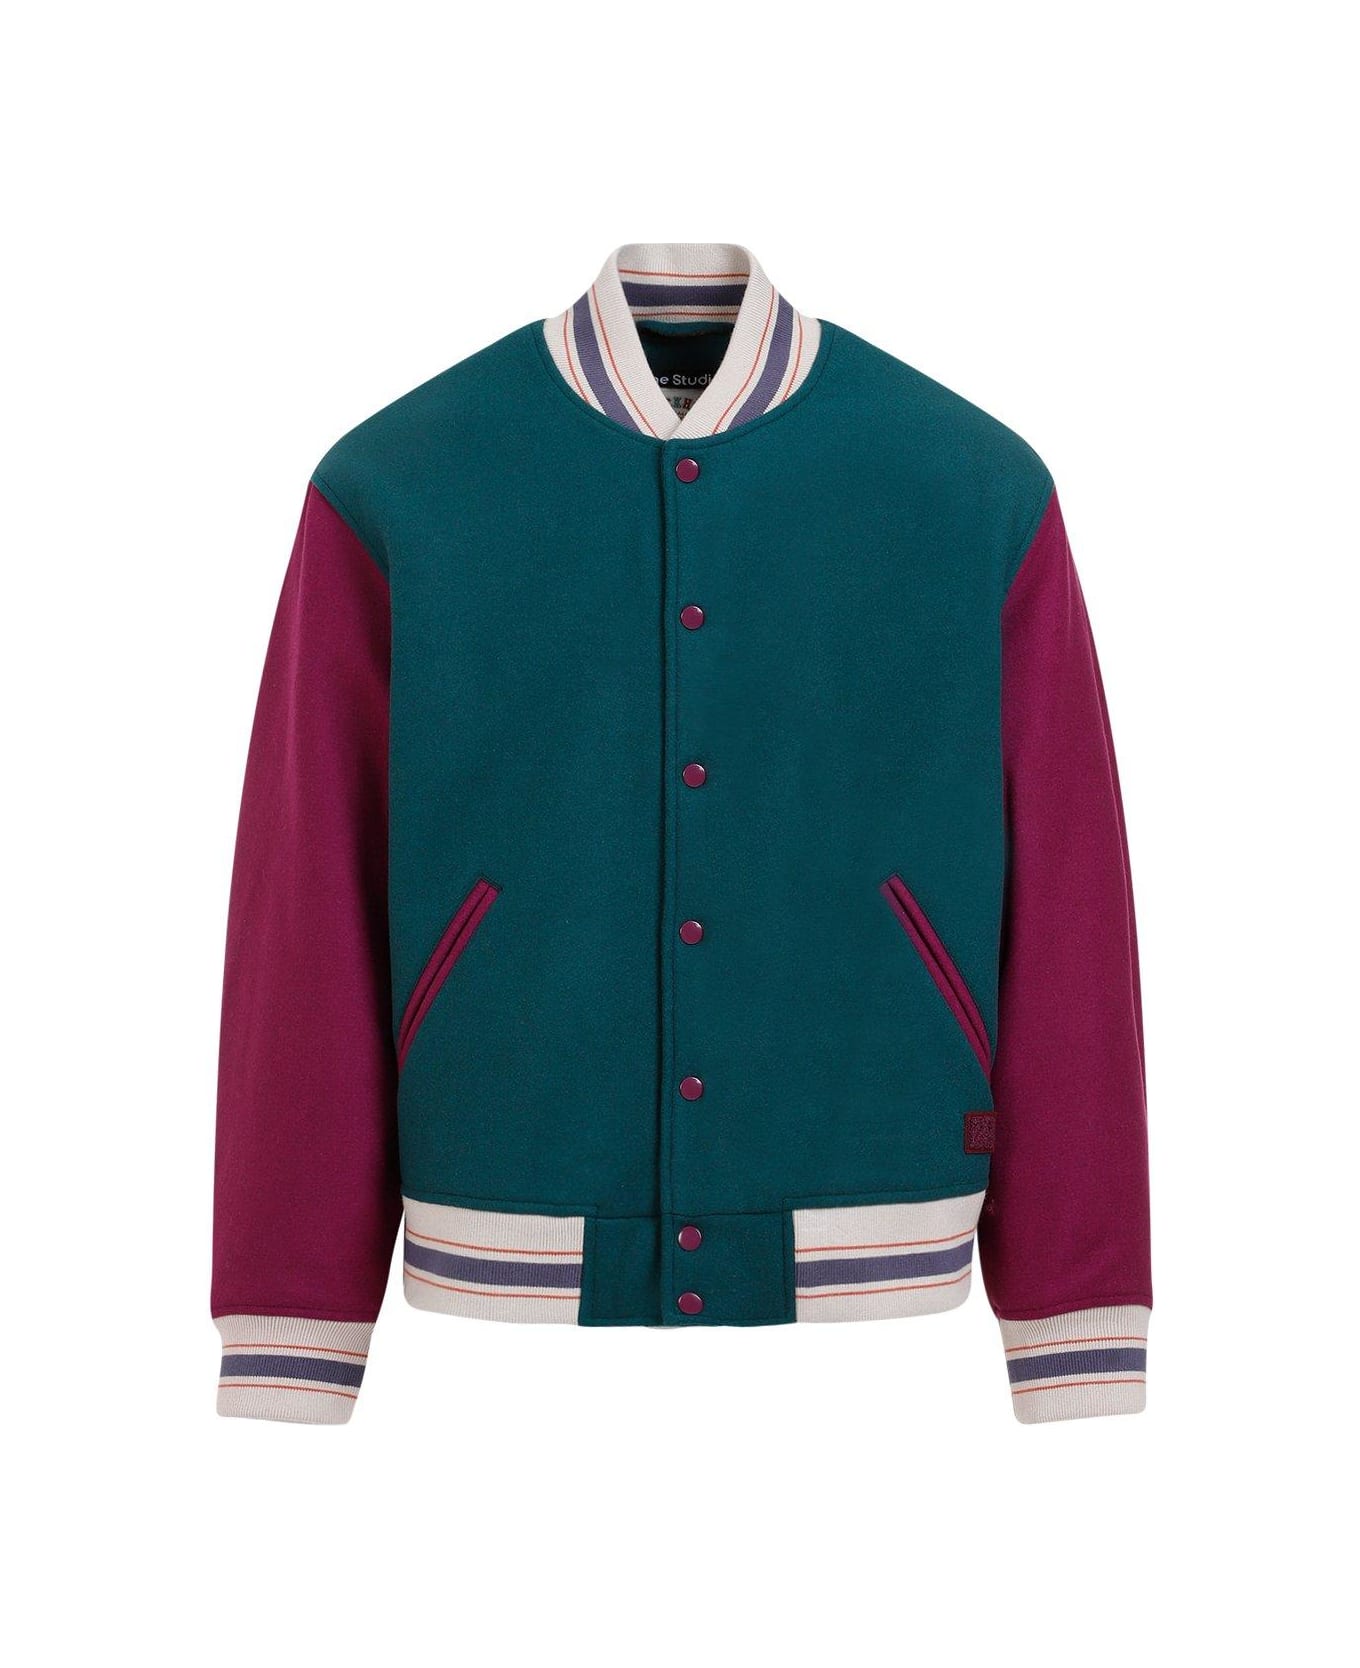 Acne Studios Colour-blocked Buttoned Jacket - Green